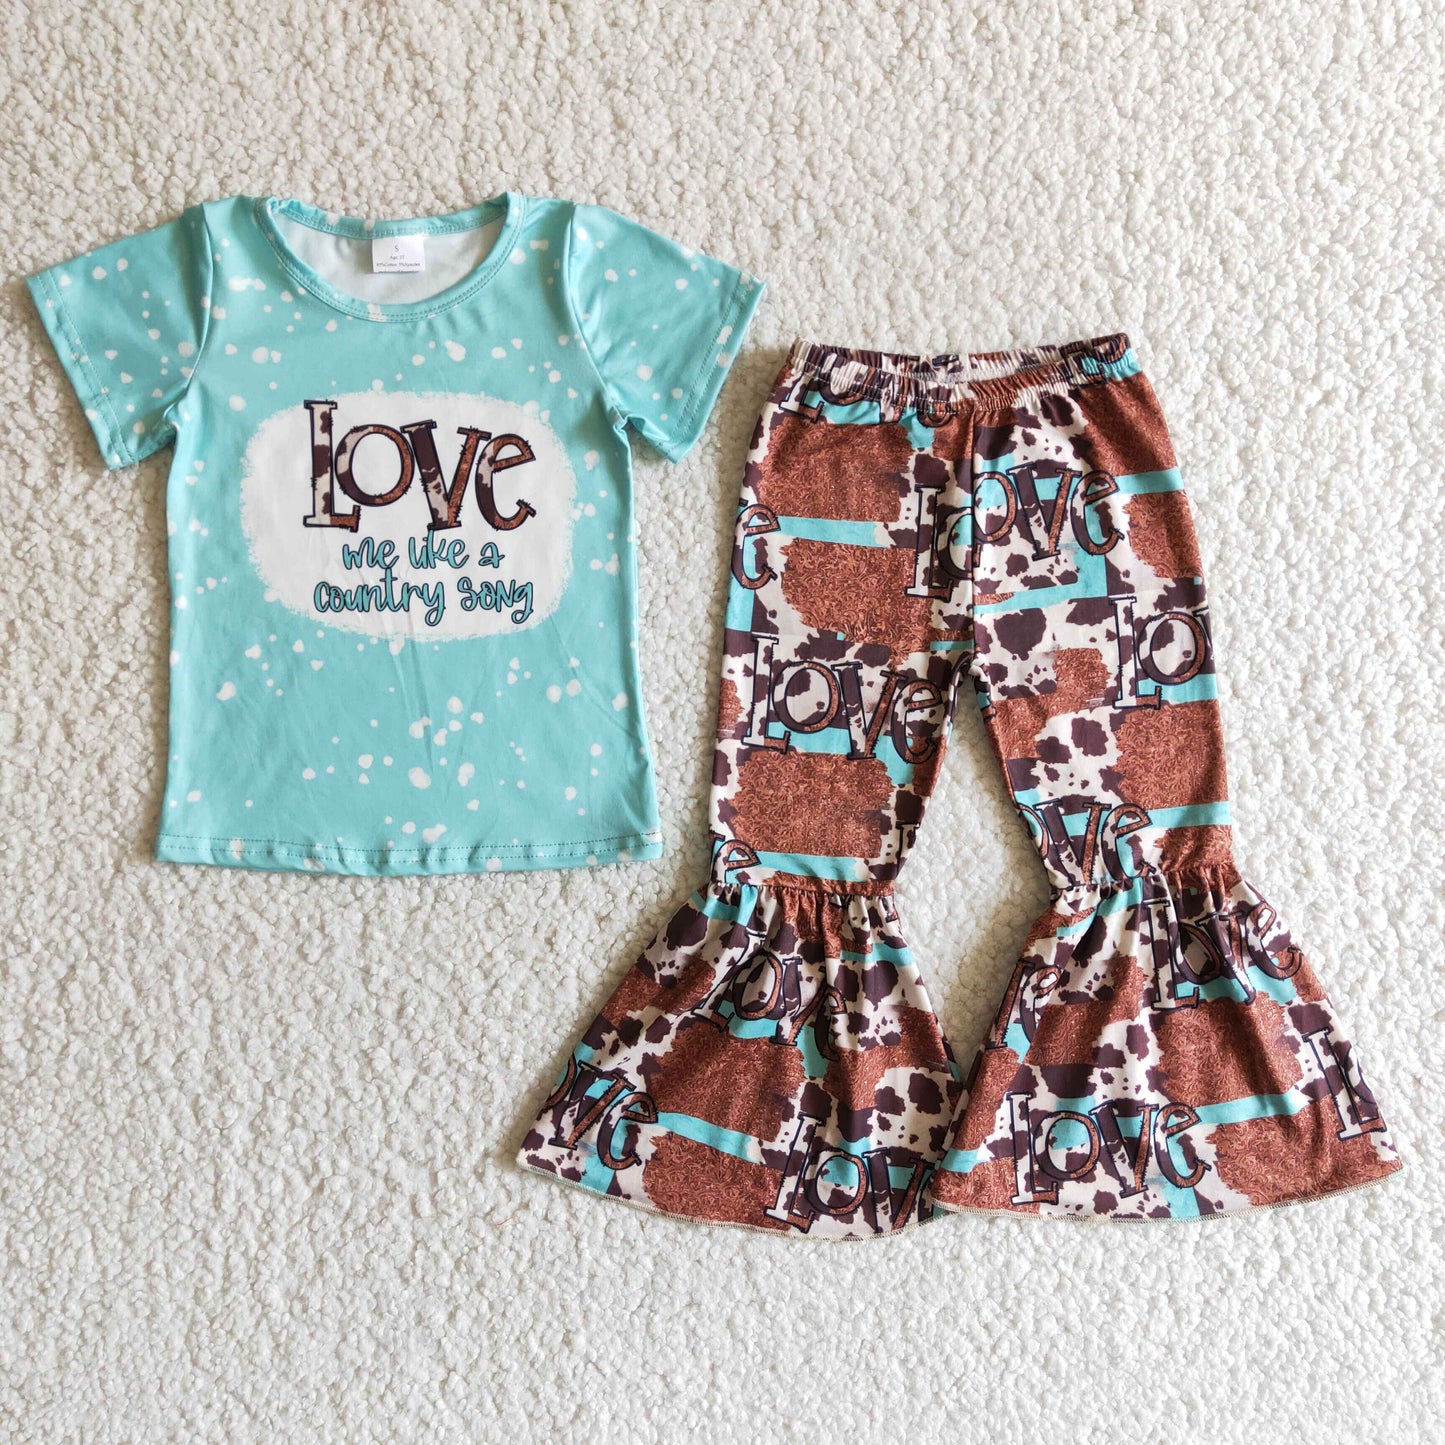 Love me like a country song baby girls summer bell bottom pants outfit B10-25